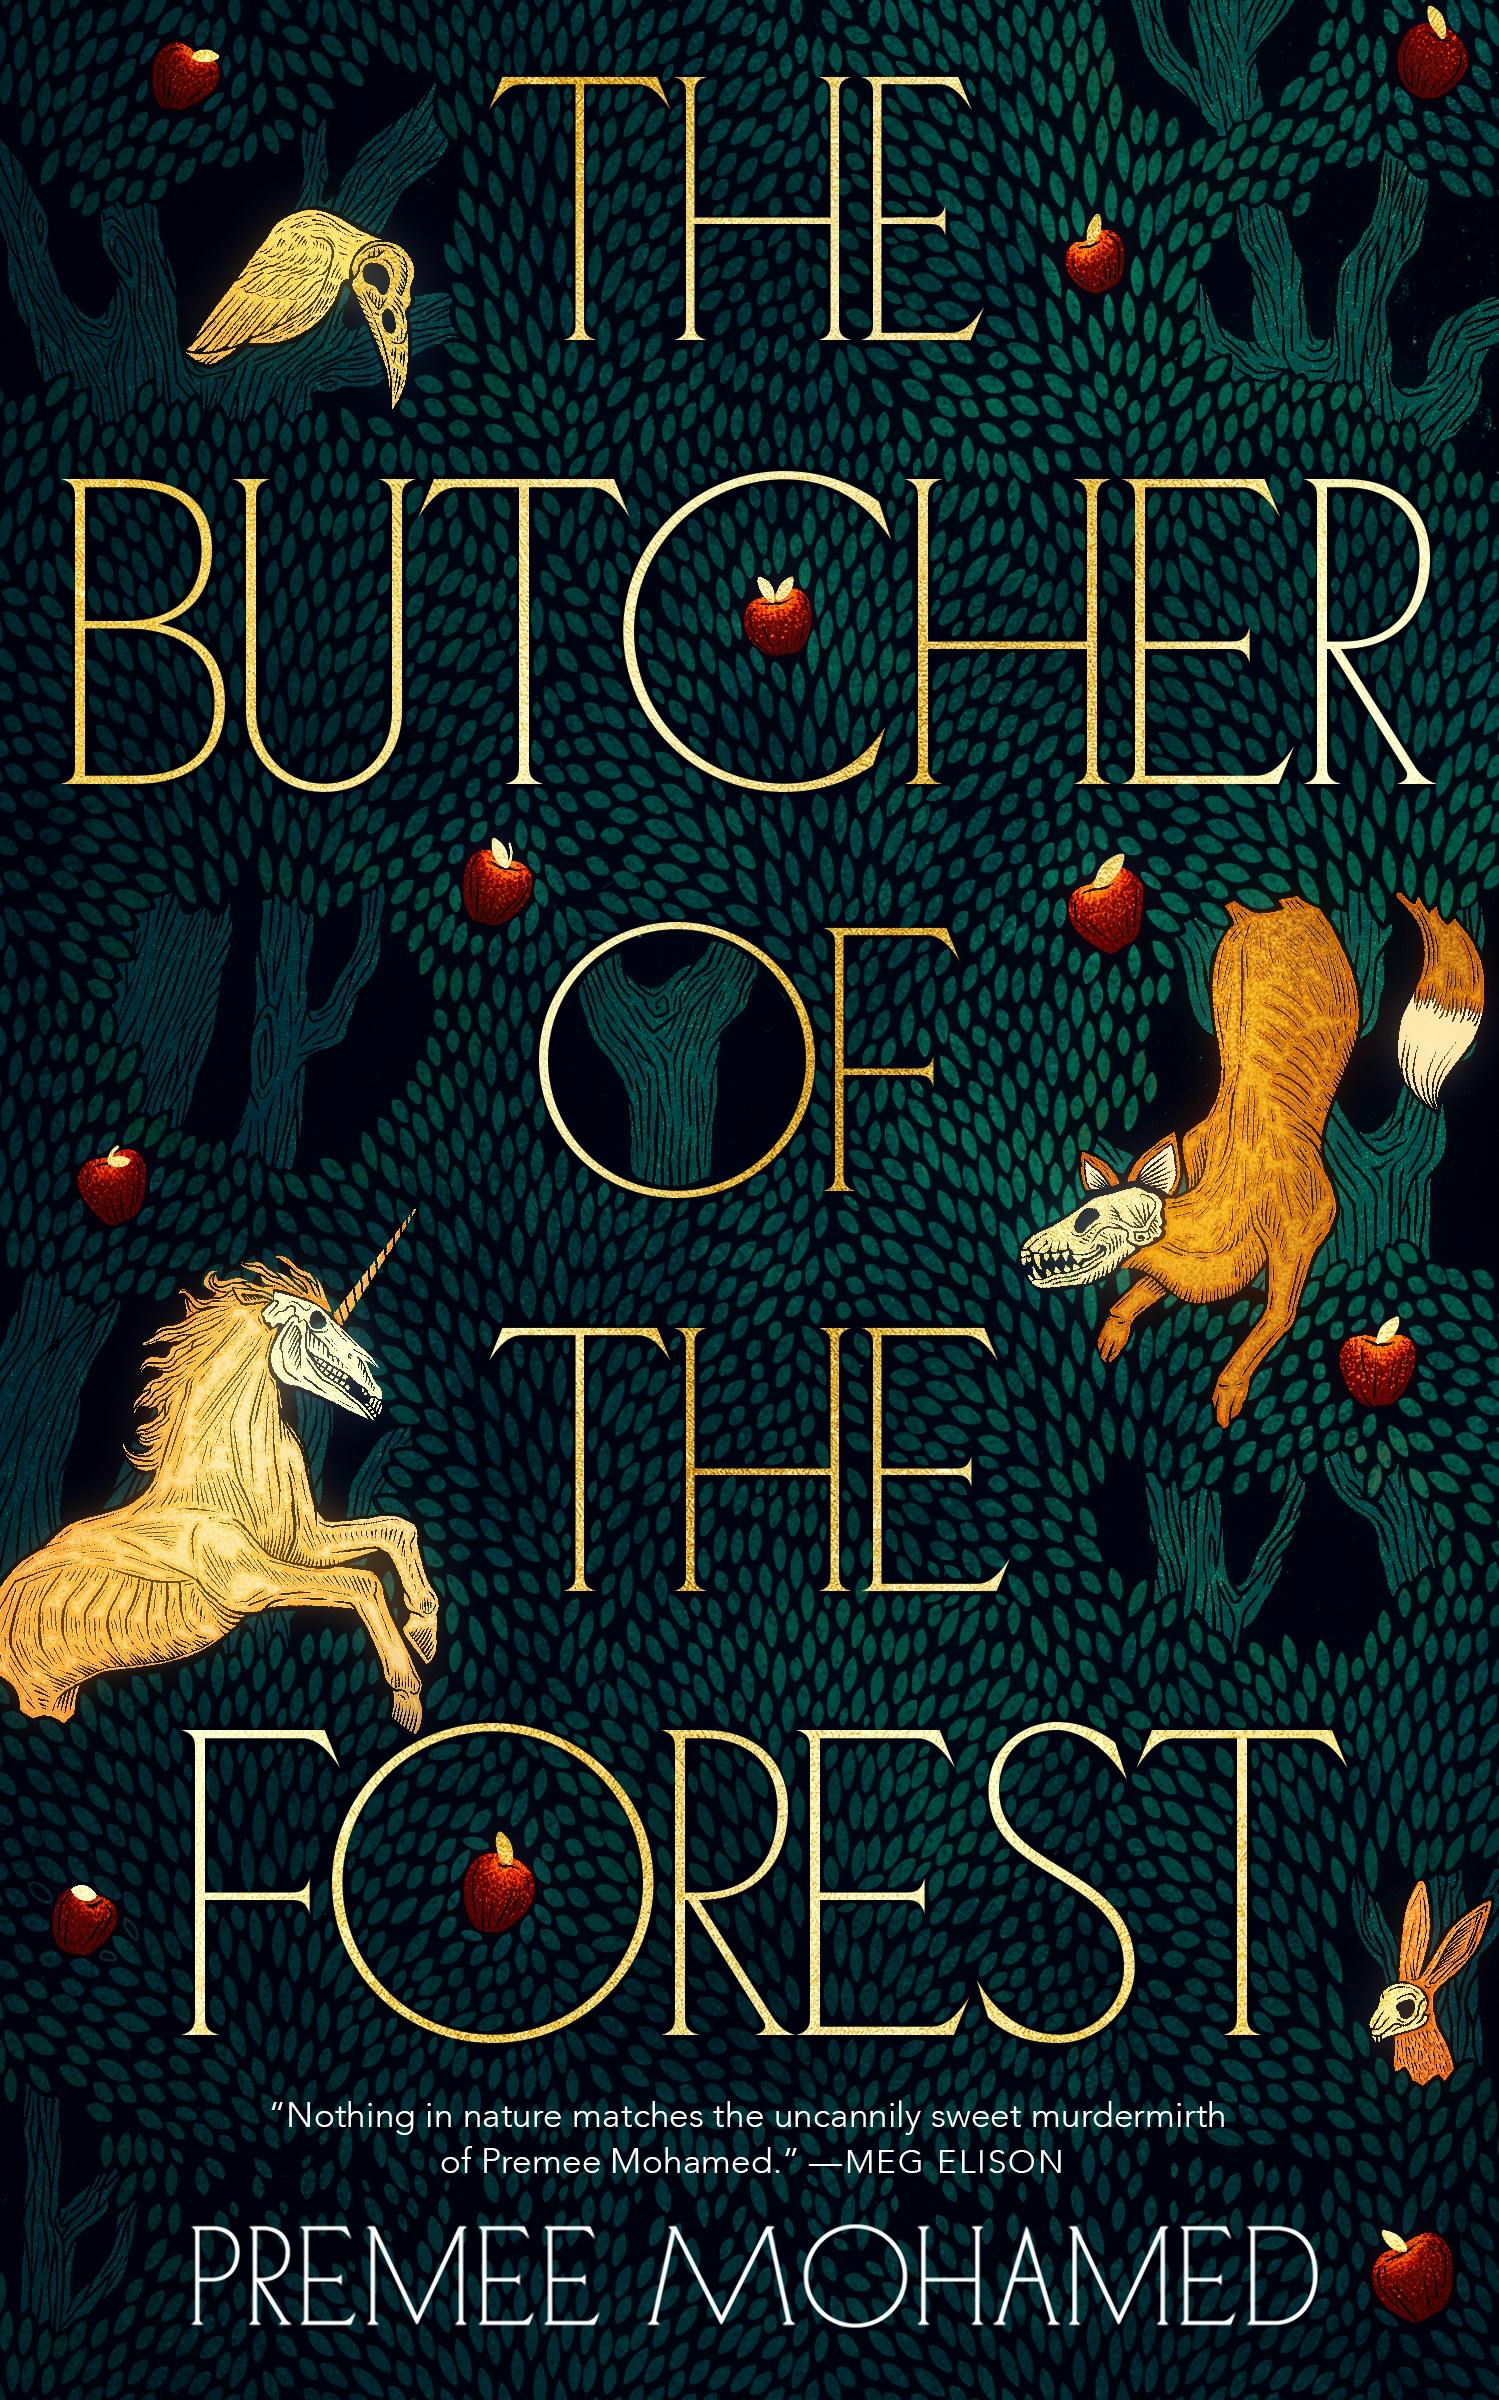 Cover for the book titled as: The Butcher of the Forest